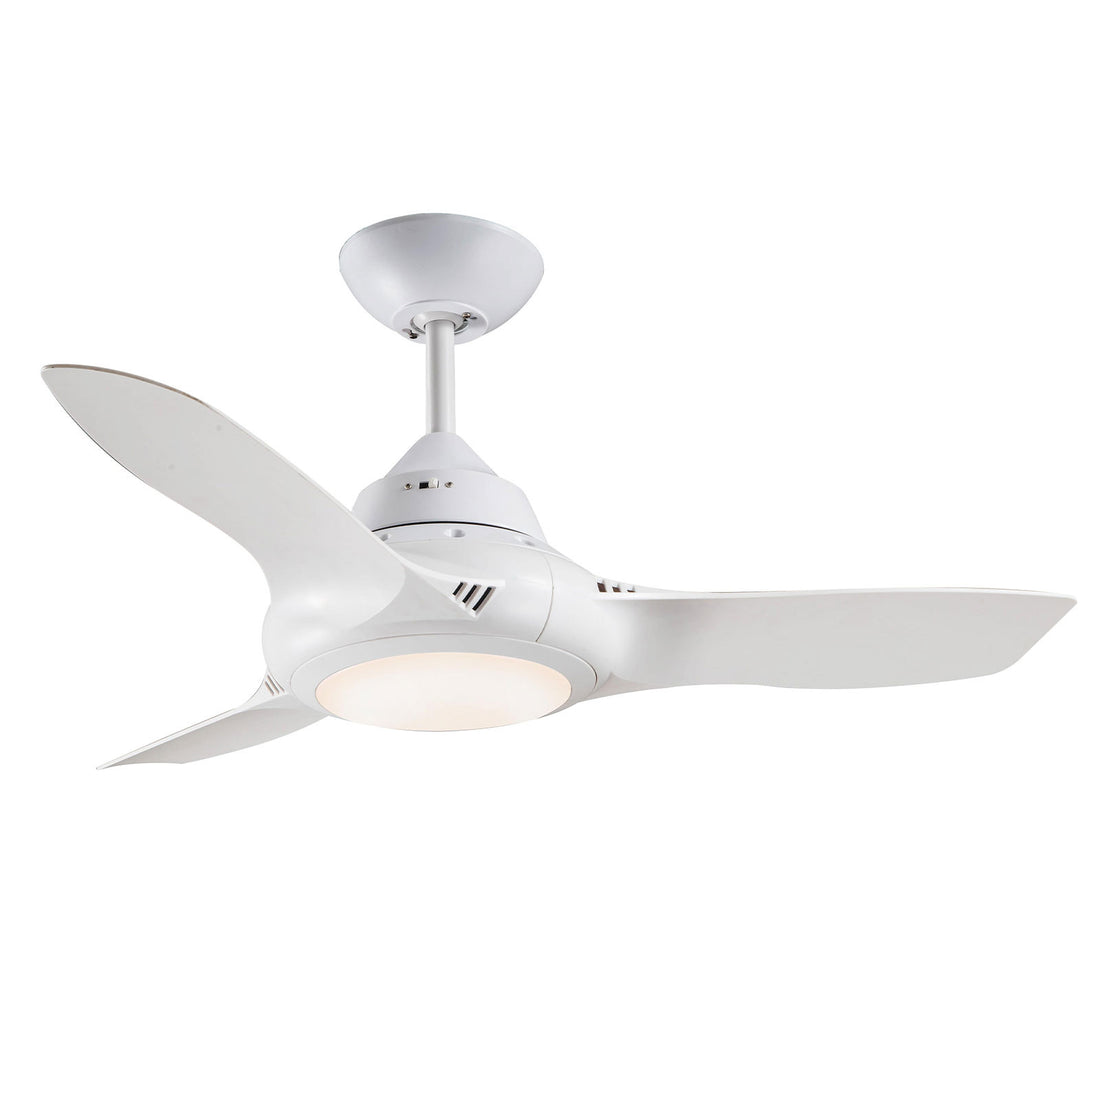 Phaser 95cm AC Ceiling Fan with LED Light